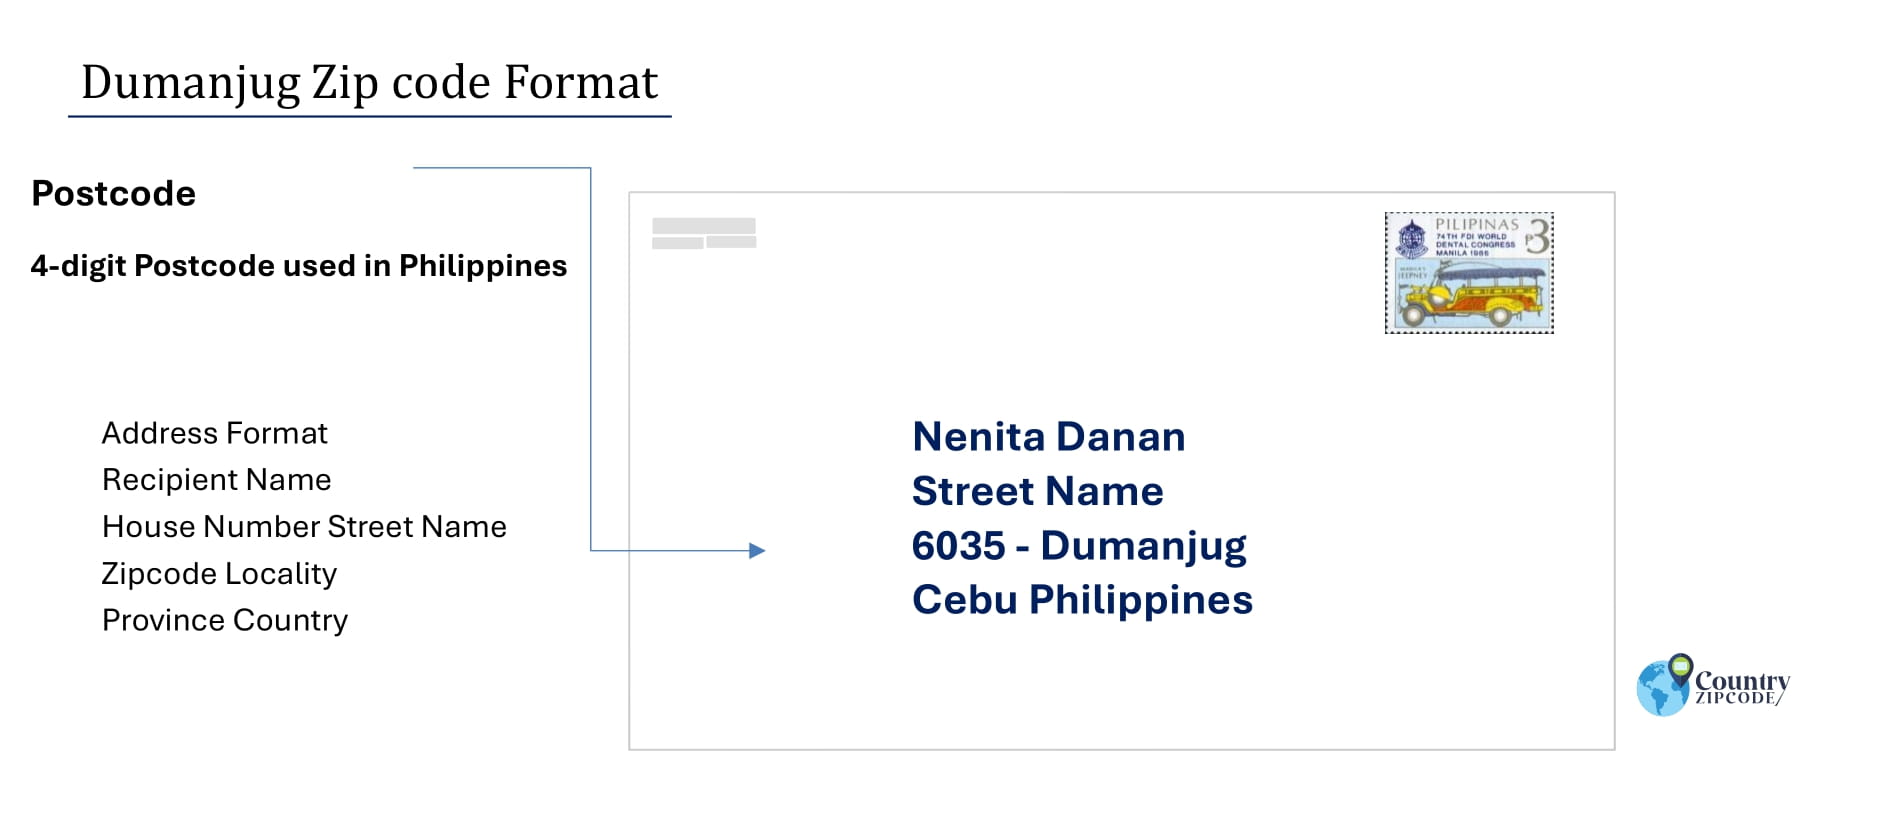 example of Dumanjug Philippines zip code and address format